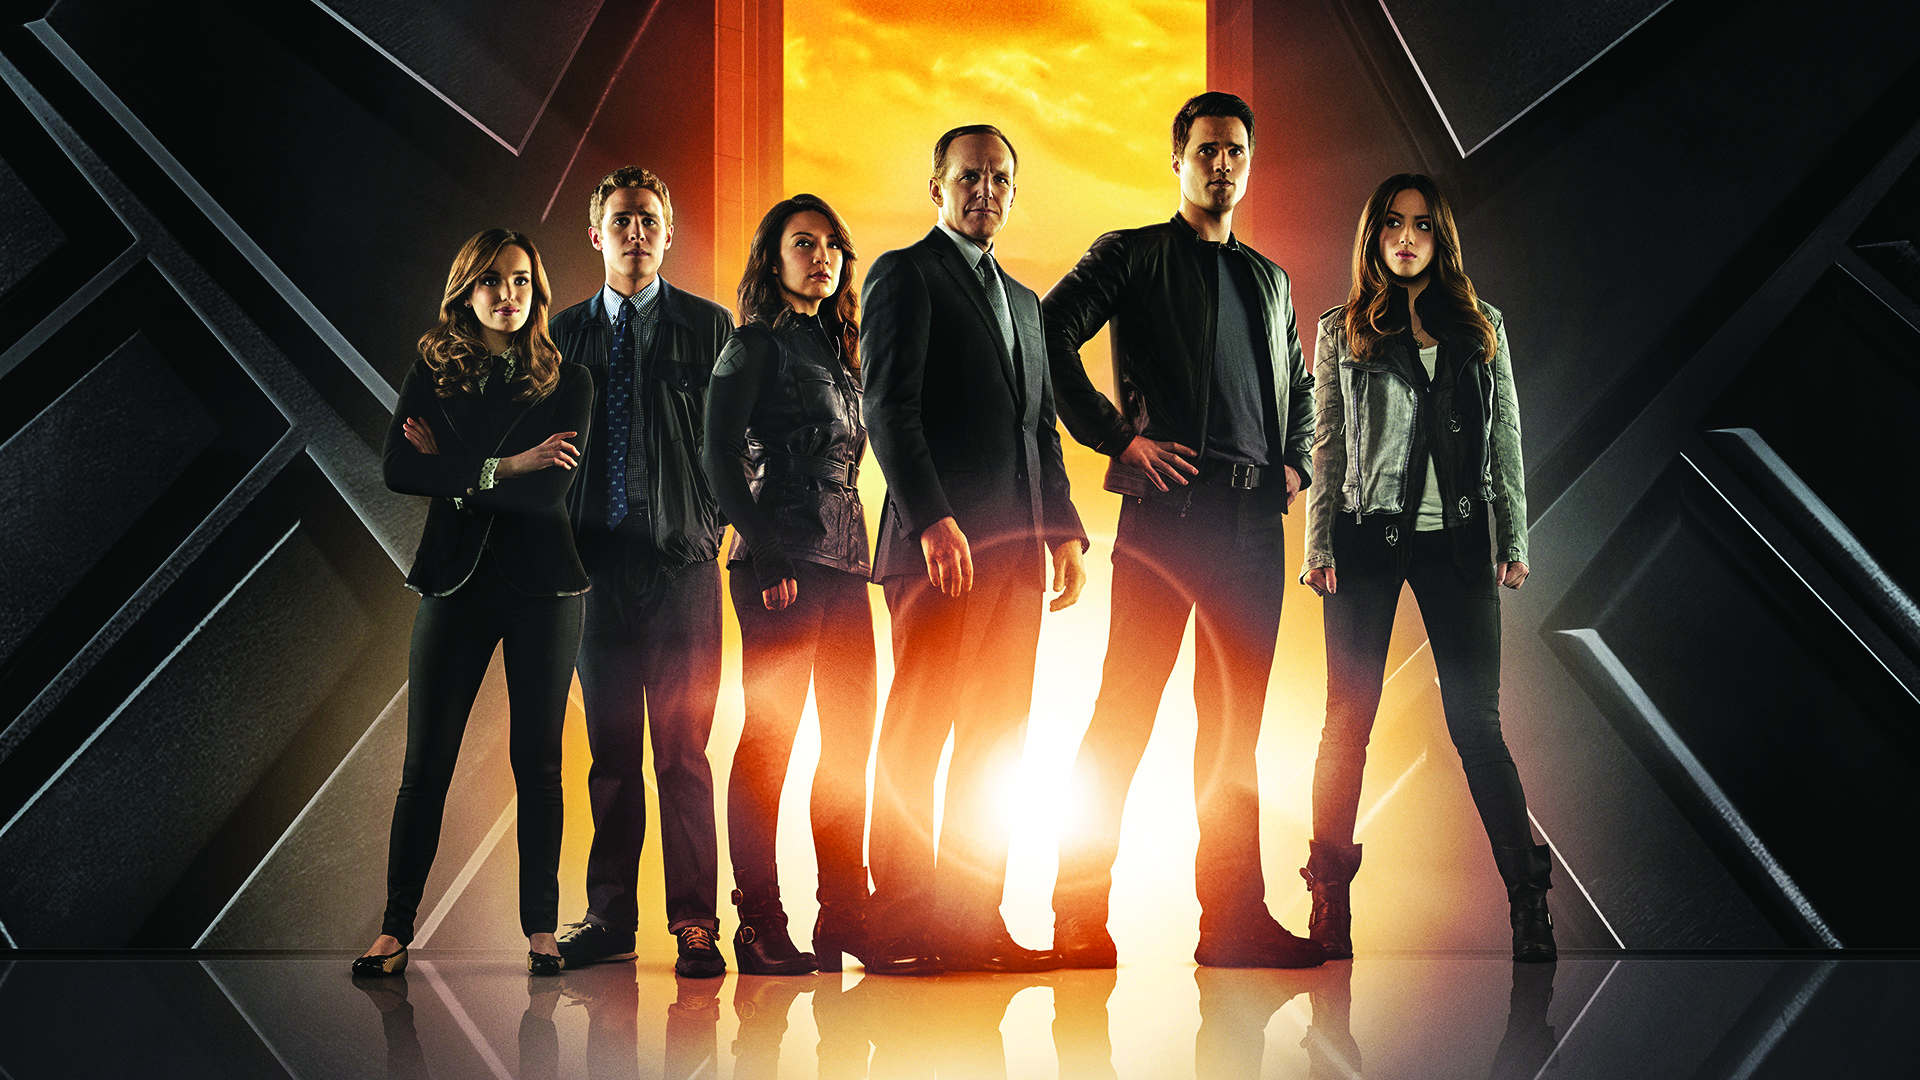 Oman Weekend Download: Agents of SHIELD is a Marvel of a show